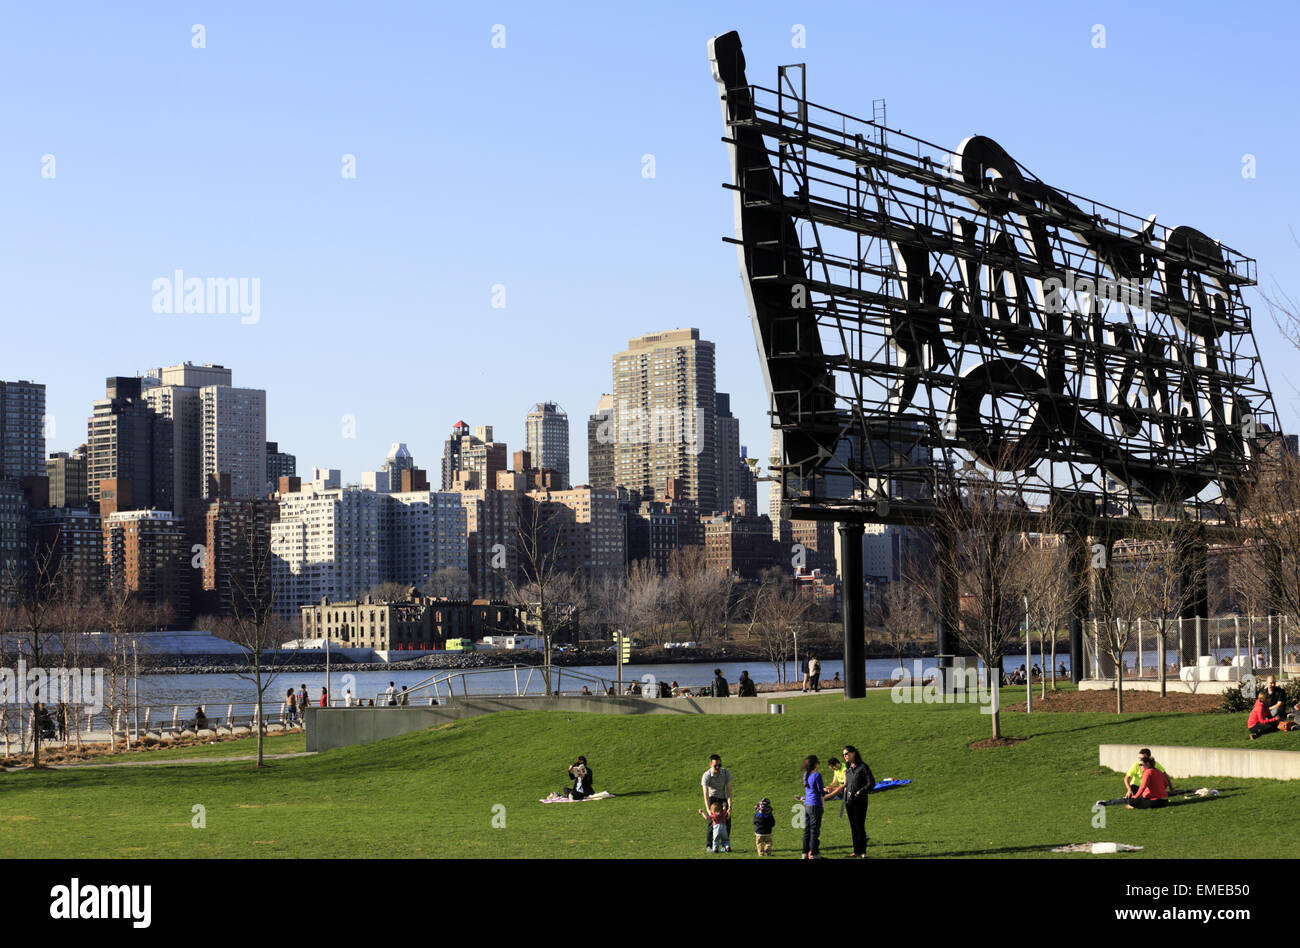 View of Midtown Manhattan with East River in foreground from Long Island City with Pepsi Cola billboard, Queens, New York USA Stock Photo